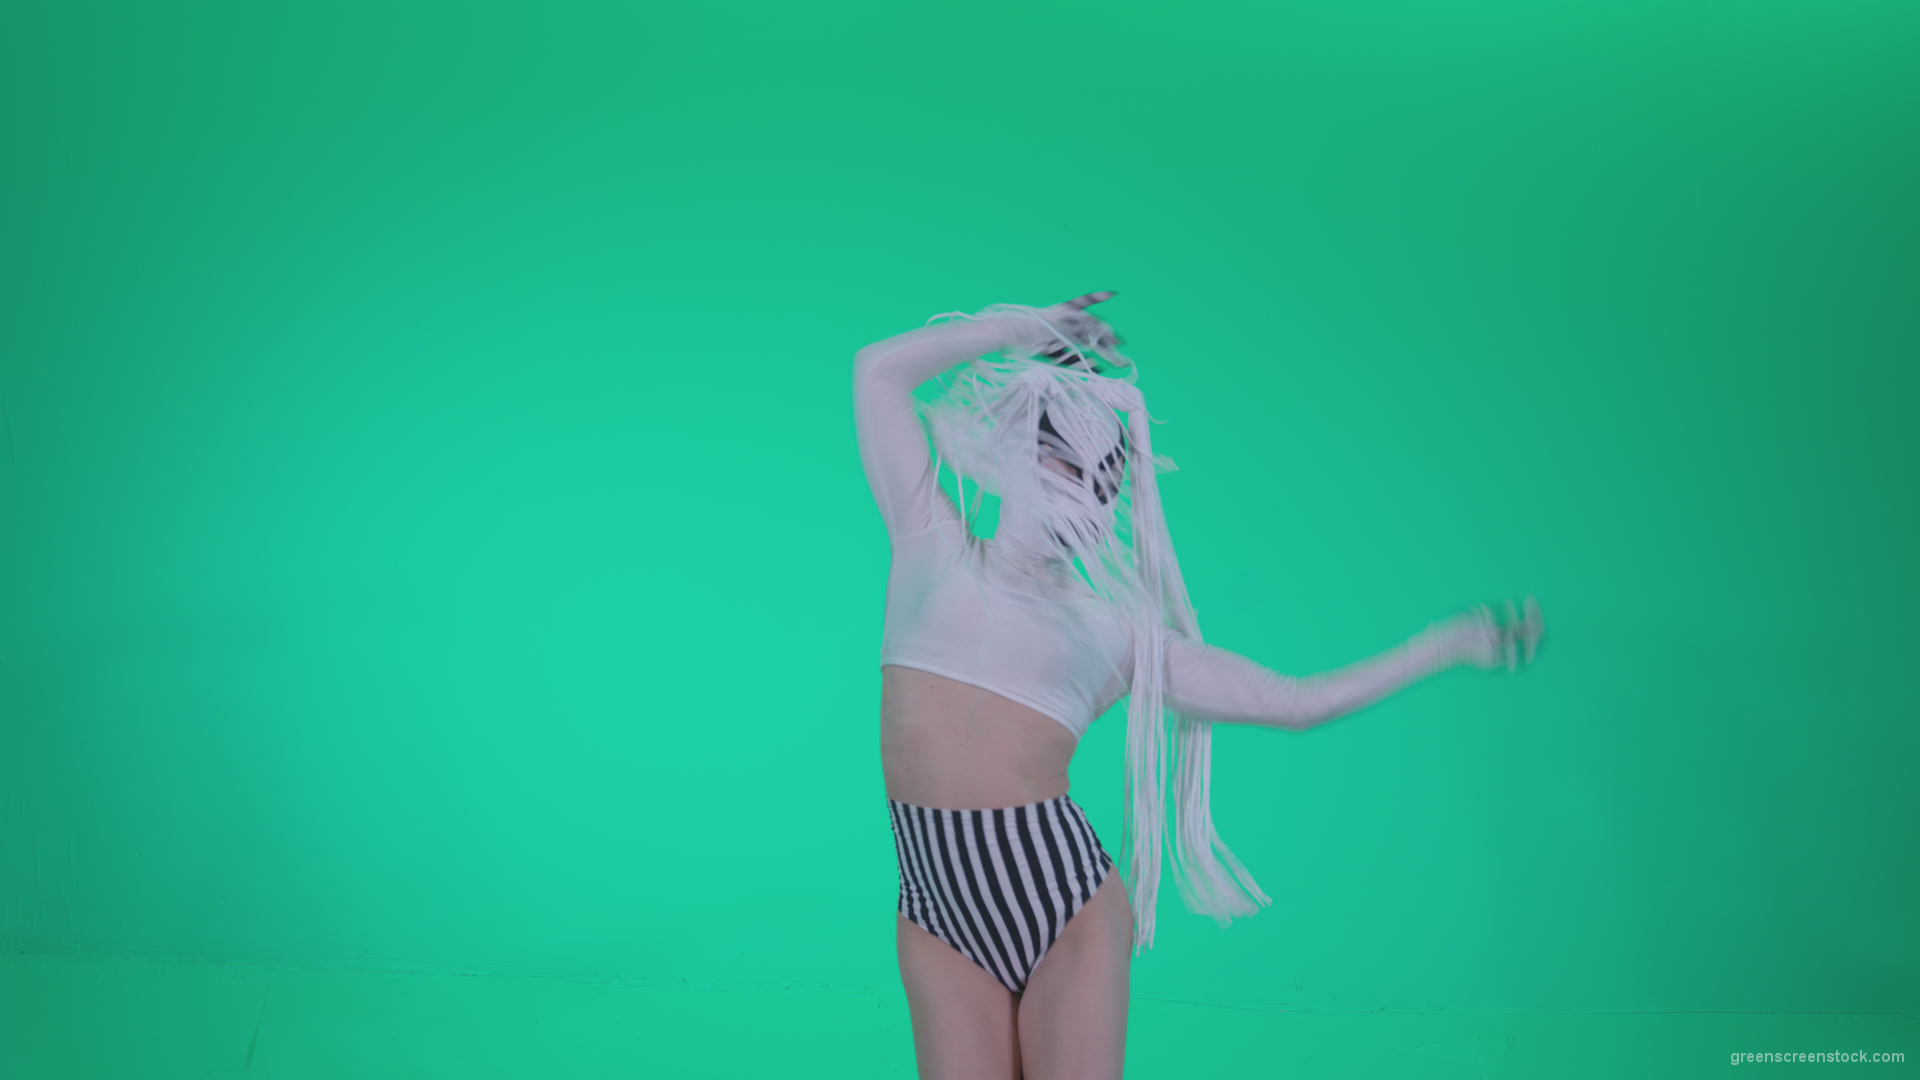 Go-go-Dancer-with-Latex-Top-t10-Green-Screen-Video-Footage_008 Green Screen Stock